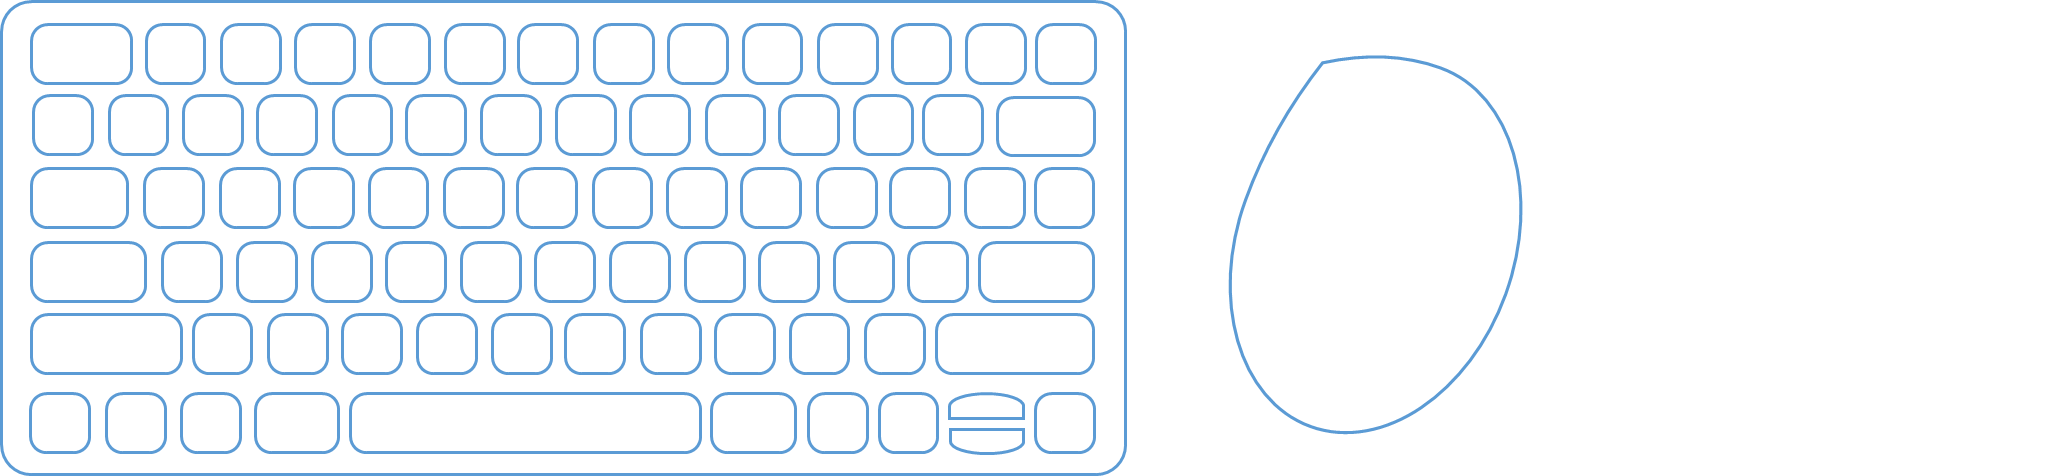 Compact sized keyboard with mouse